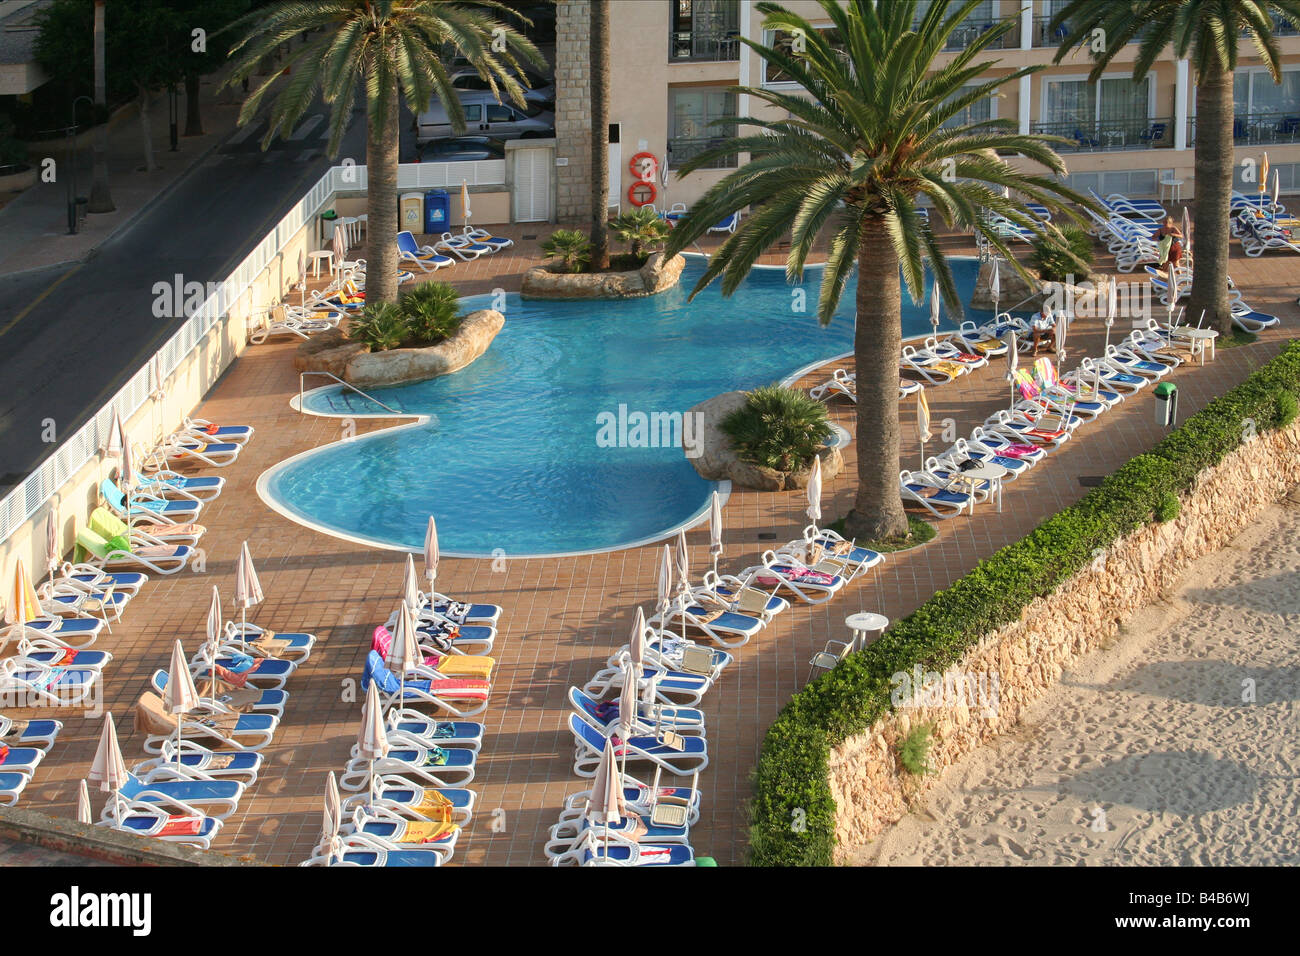 Every Sunbed has a towel on it as the sun rises at this hotel in Majorca. Stock Photo